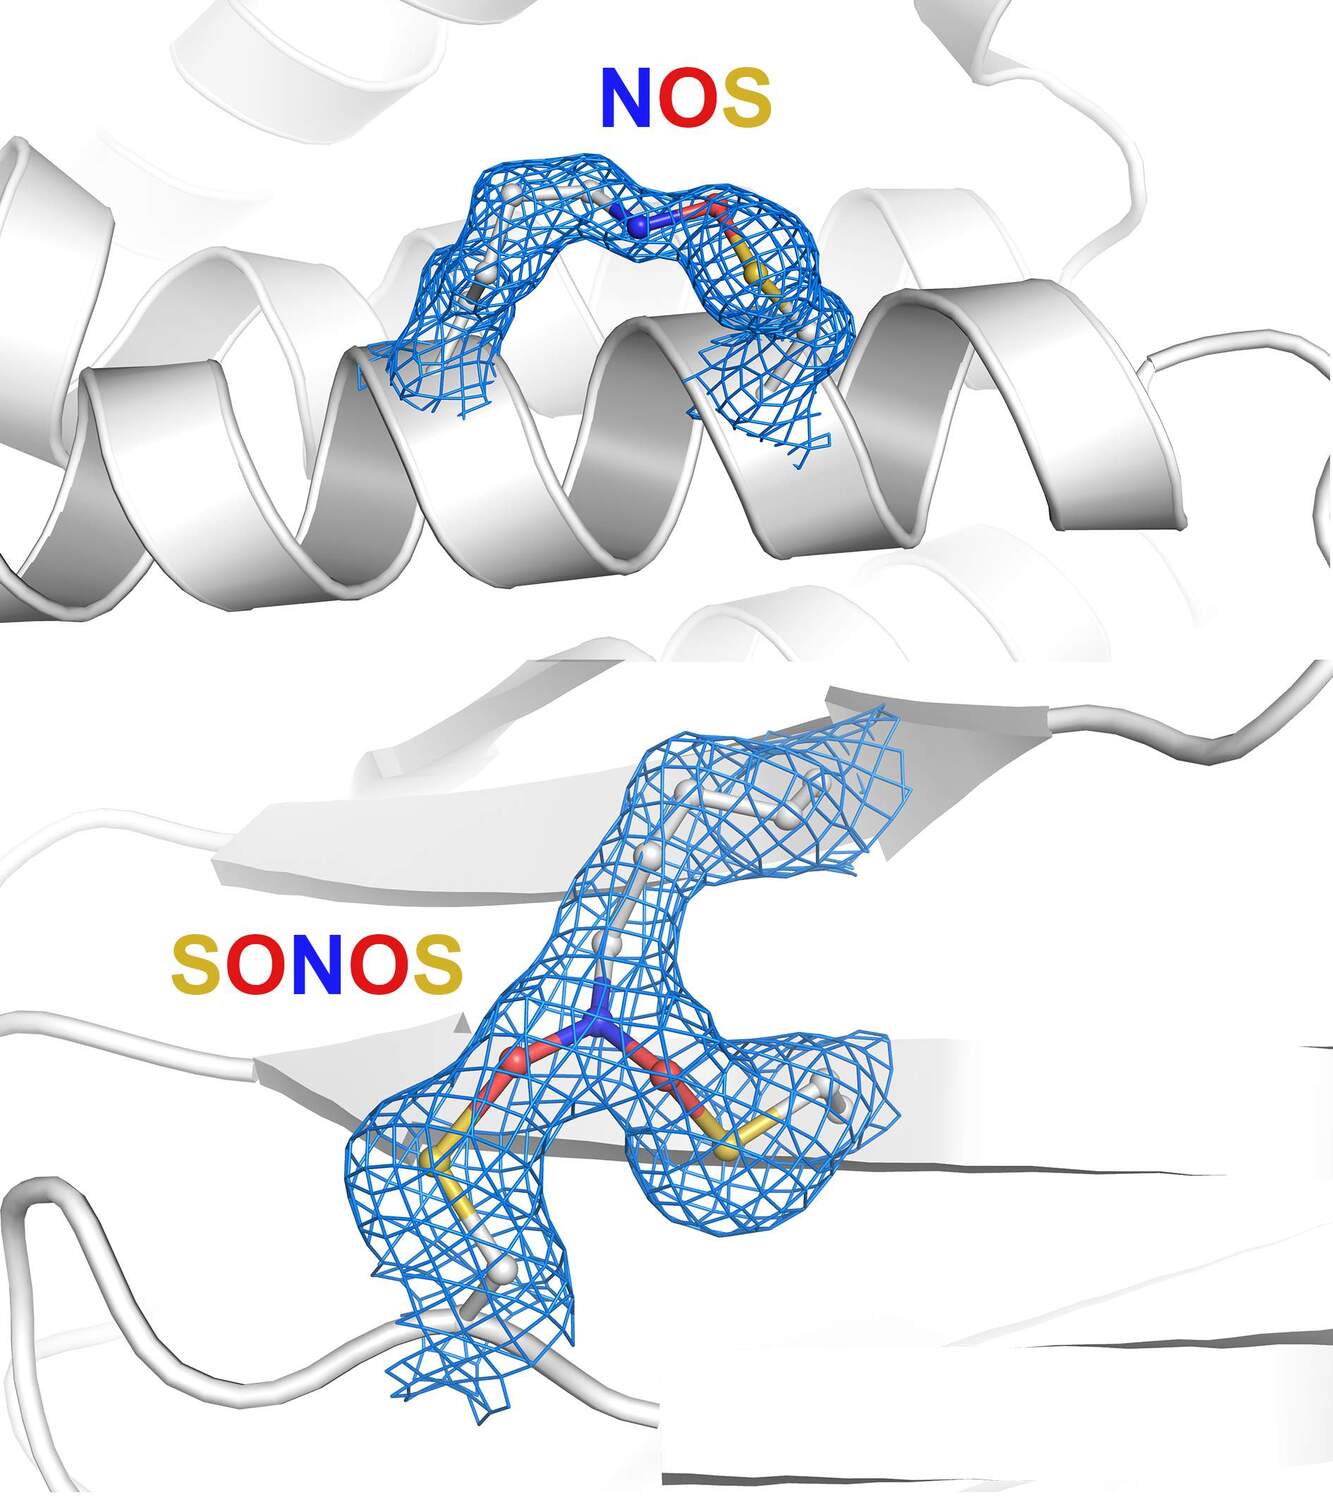 Researchers have recently discovered different types of protein switches which they have now identified as having a major role in all domains of life, from viruses like coronavirus to bacteria, fungi, plants and animals including humans. NOS group (Nitrogen-Oxygen-Sulfur) above and SONOS group (Sulfur-Oxygen-Nitrogen-Oxygen-Sulfur) below.